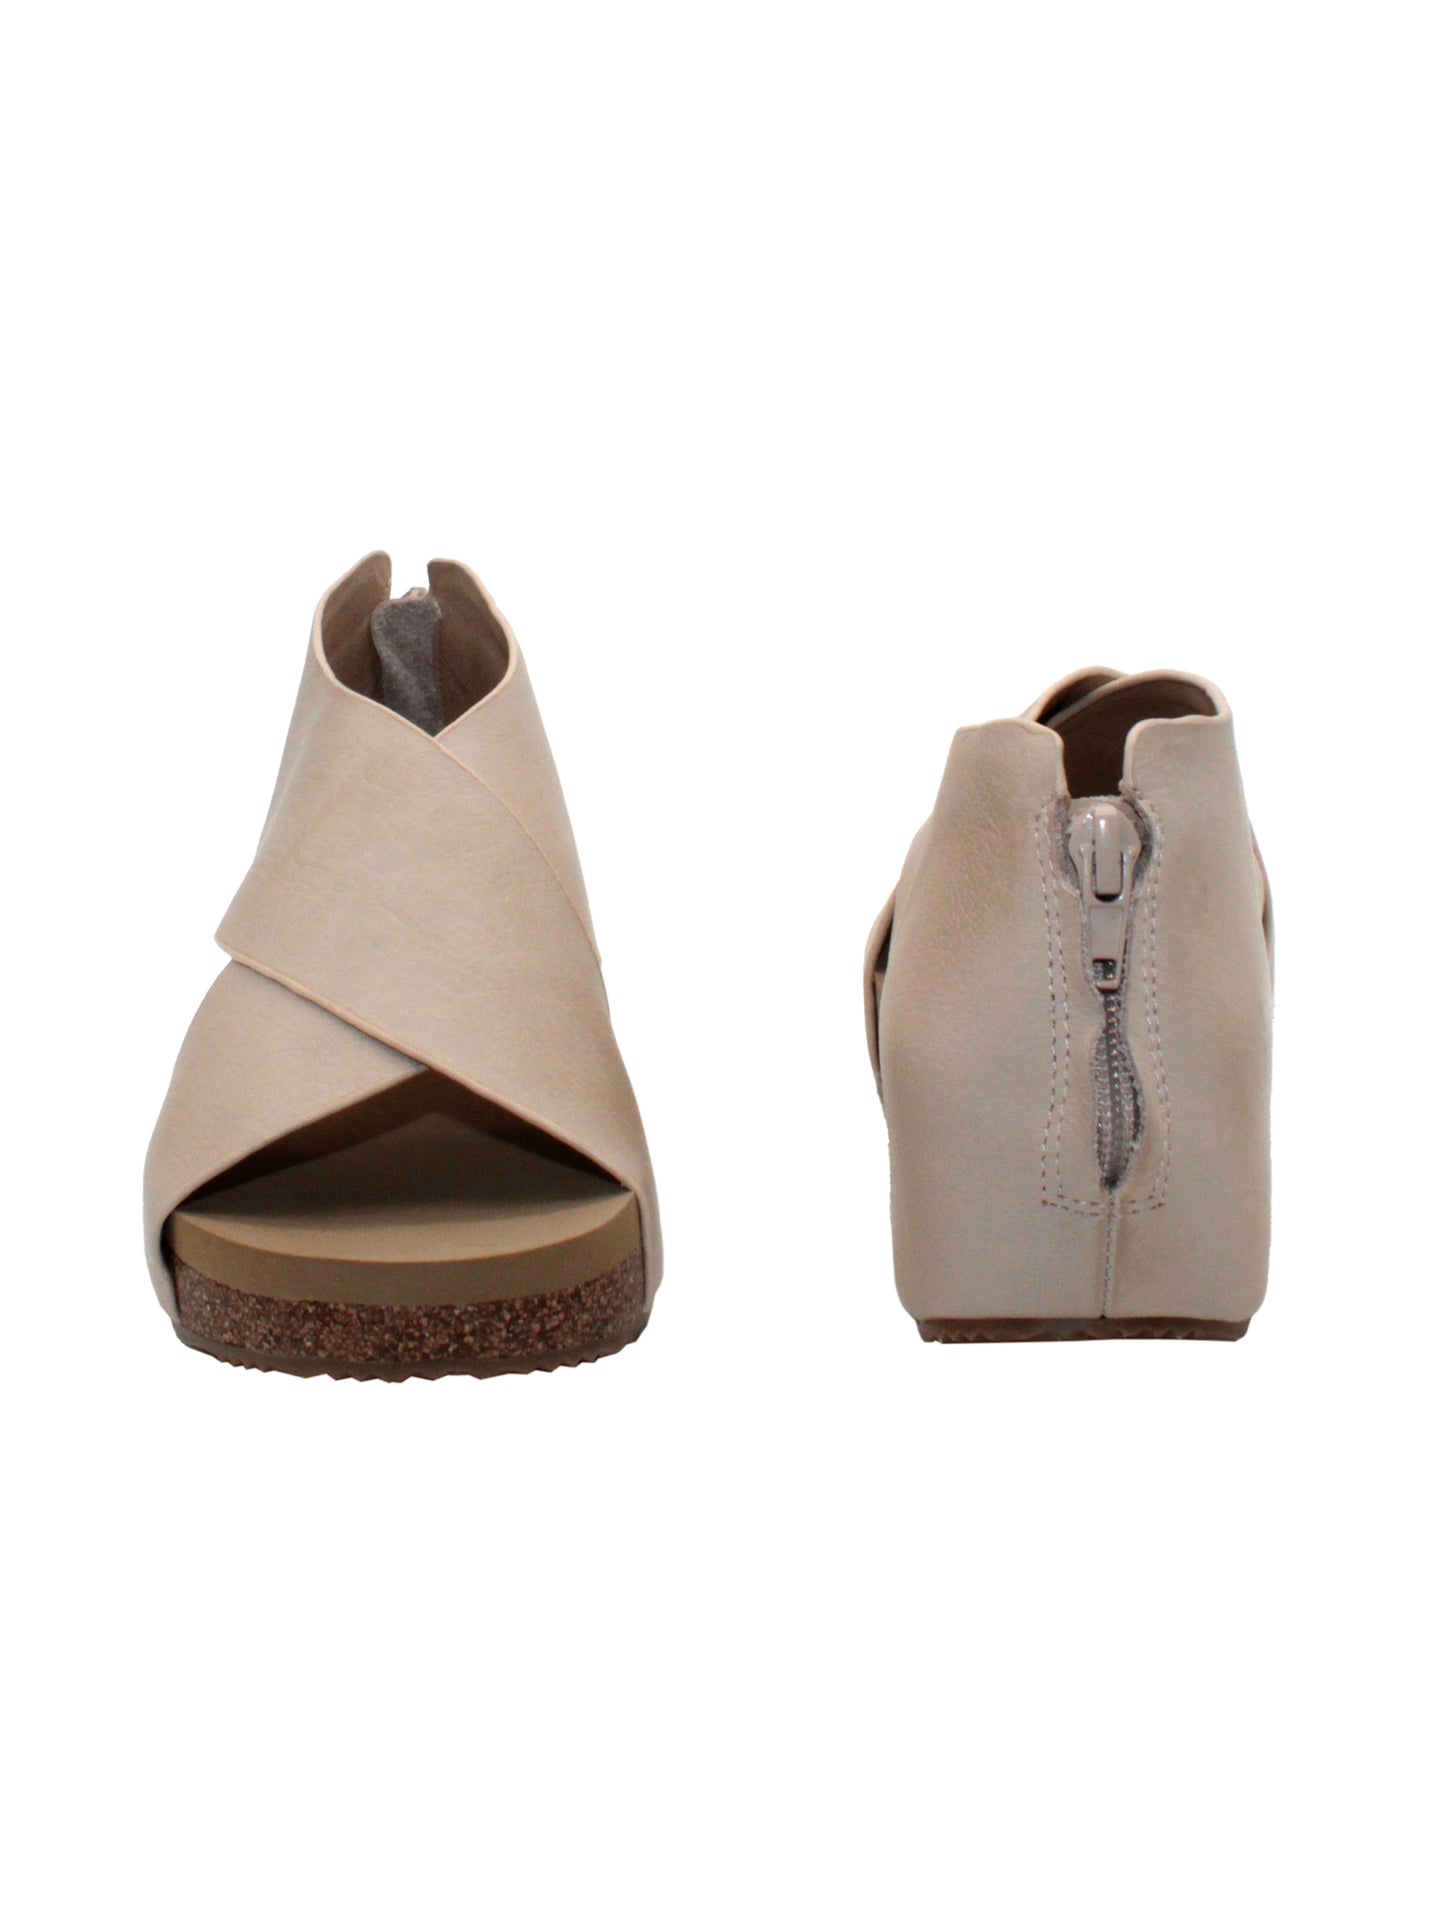 The ‘Alton’ beige sandals by Volatile are made from plush genuine suede and designed with crisscross straps that meet in the back for a closed-but-open effect suitable for year-round styling. Featuring Volatile’s signature ultra-comfort EVA insole stationed on a modest low wedge, and durable, non-skid rubber traction soles, these are ideal for all day walking. front and back